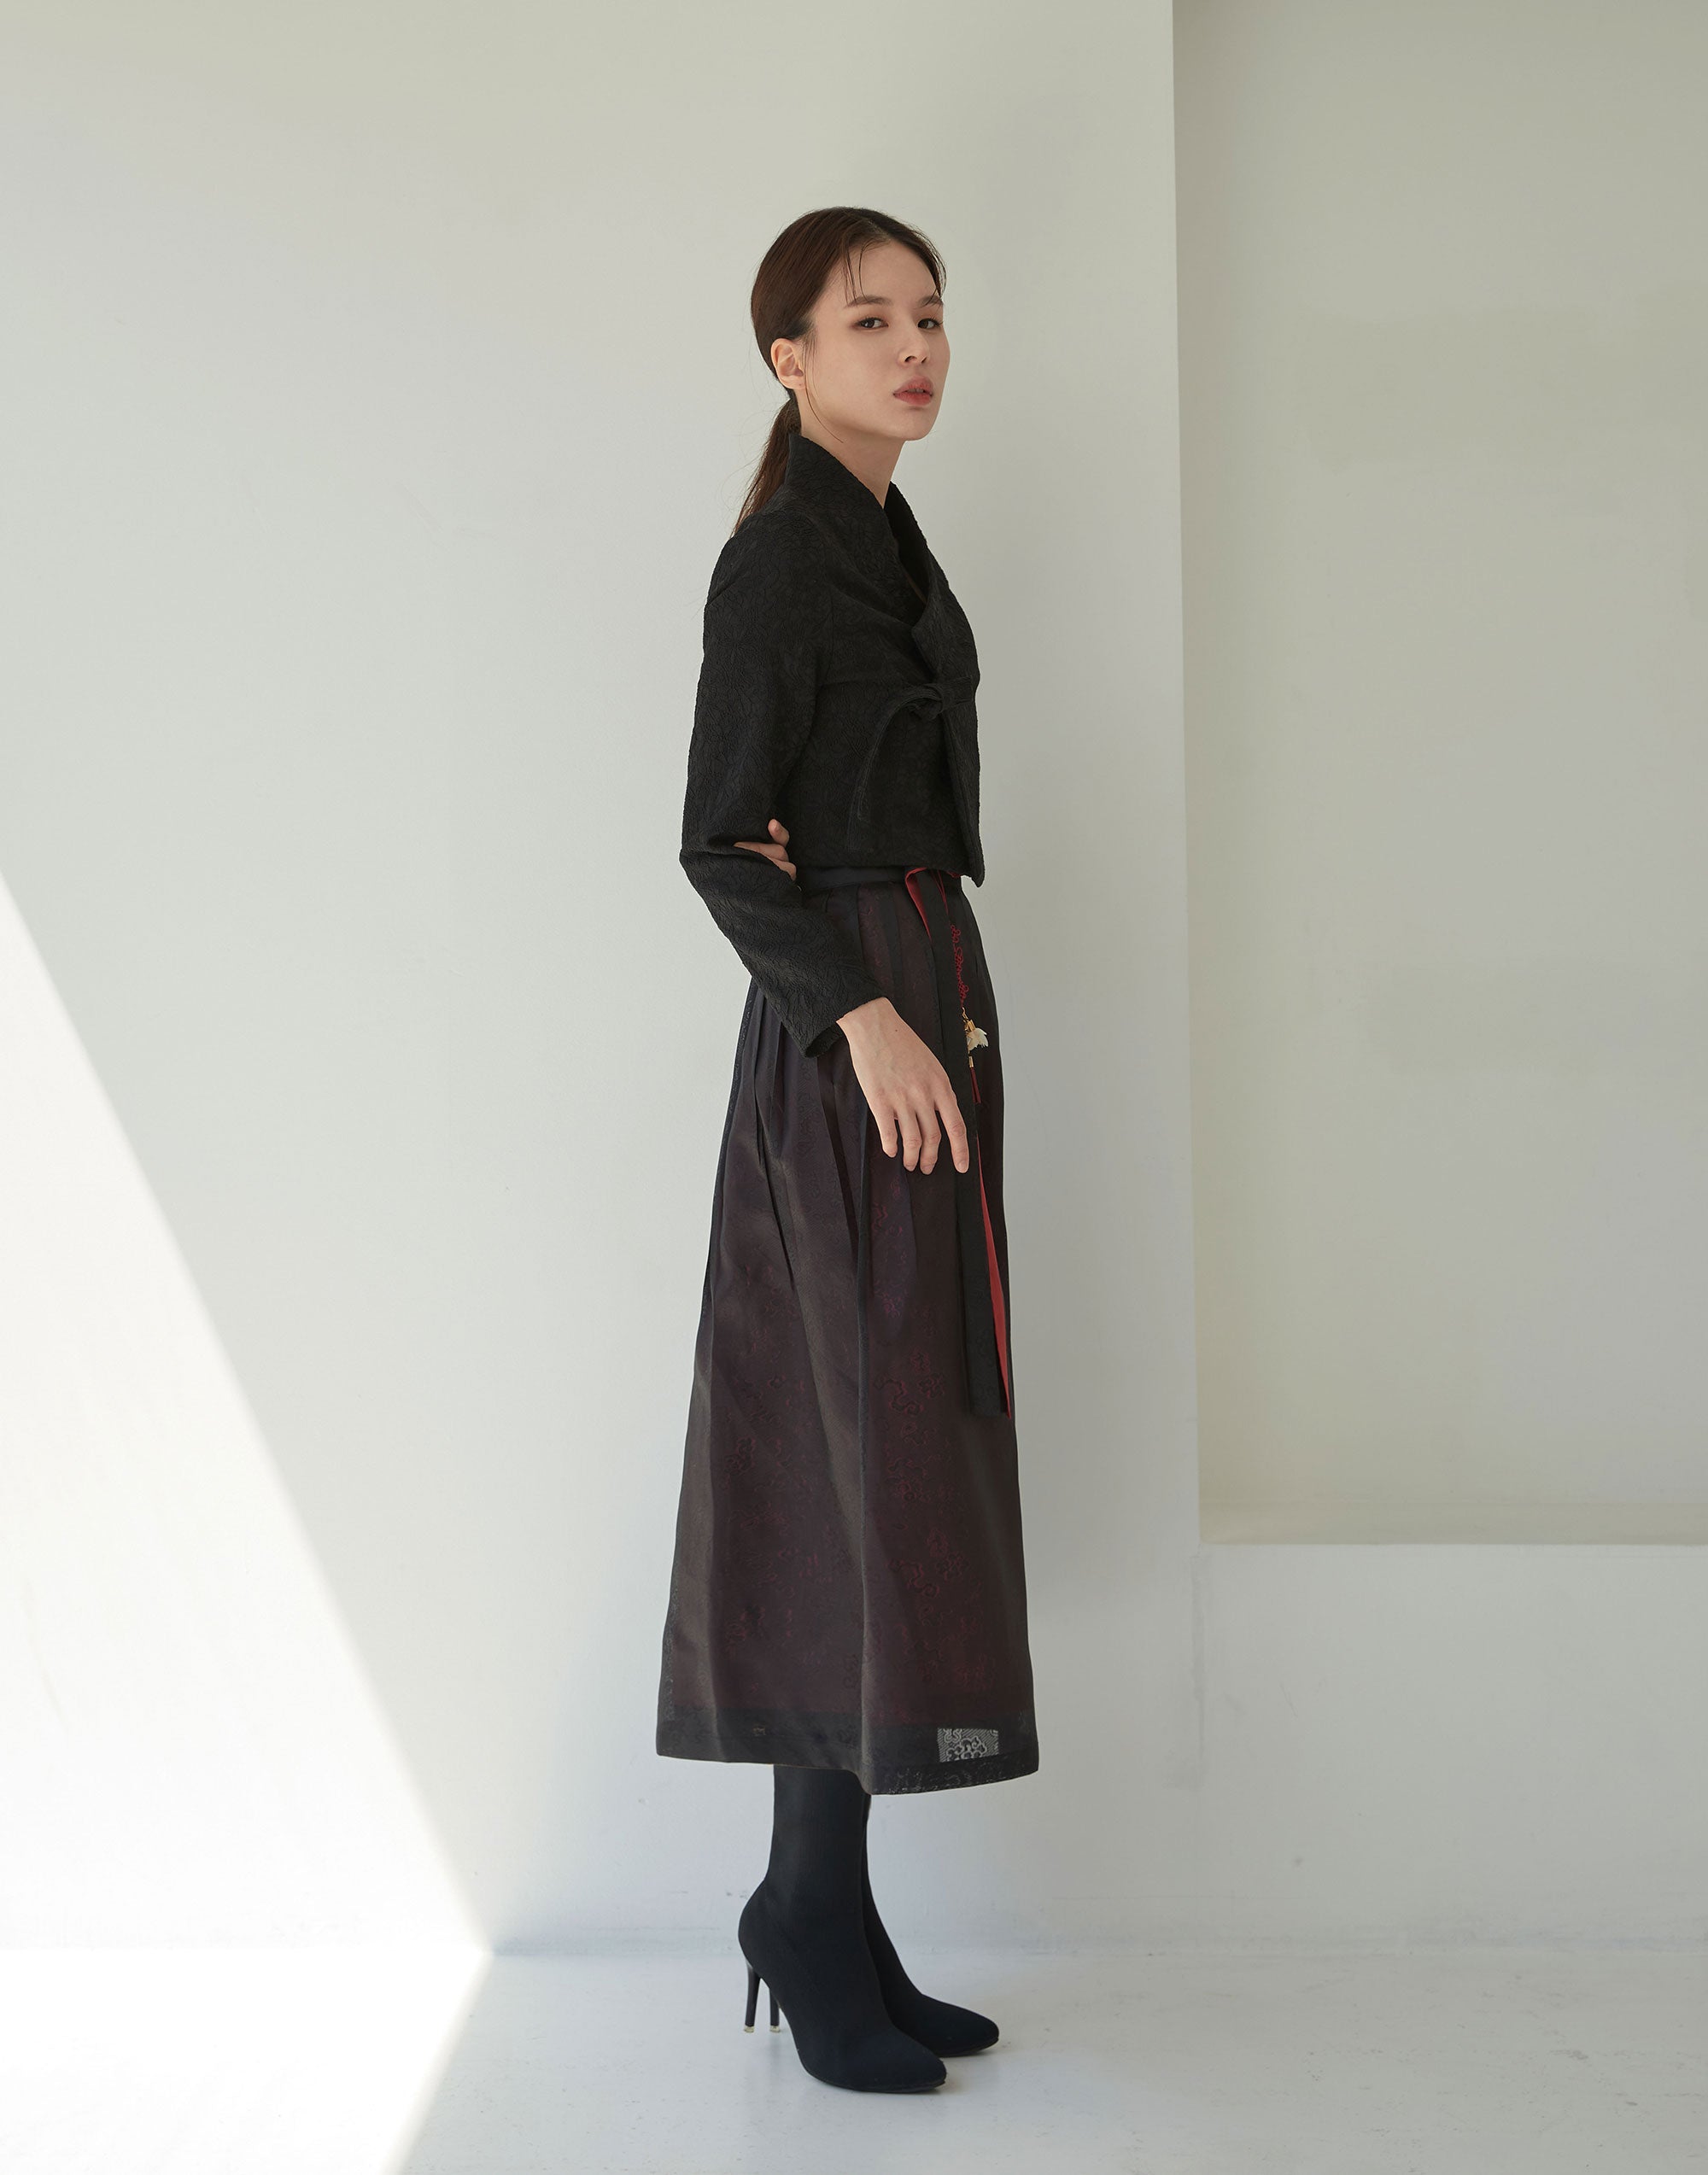 Skirt - Traditional Black red